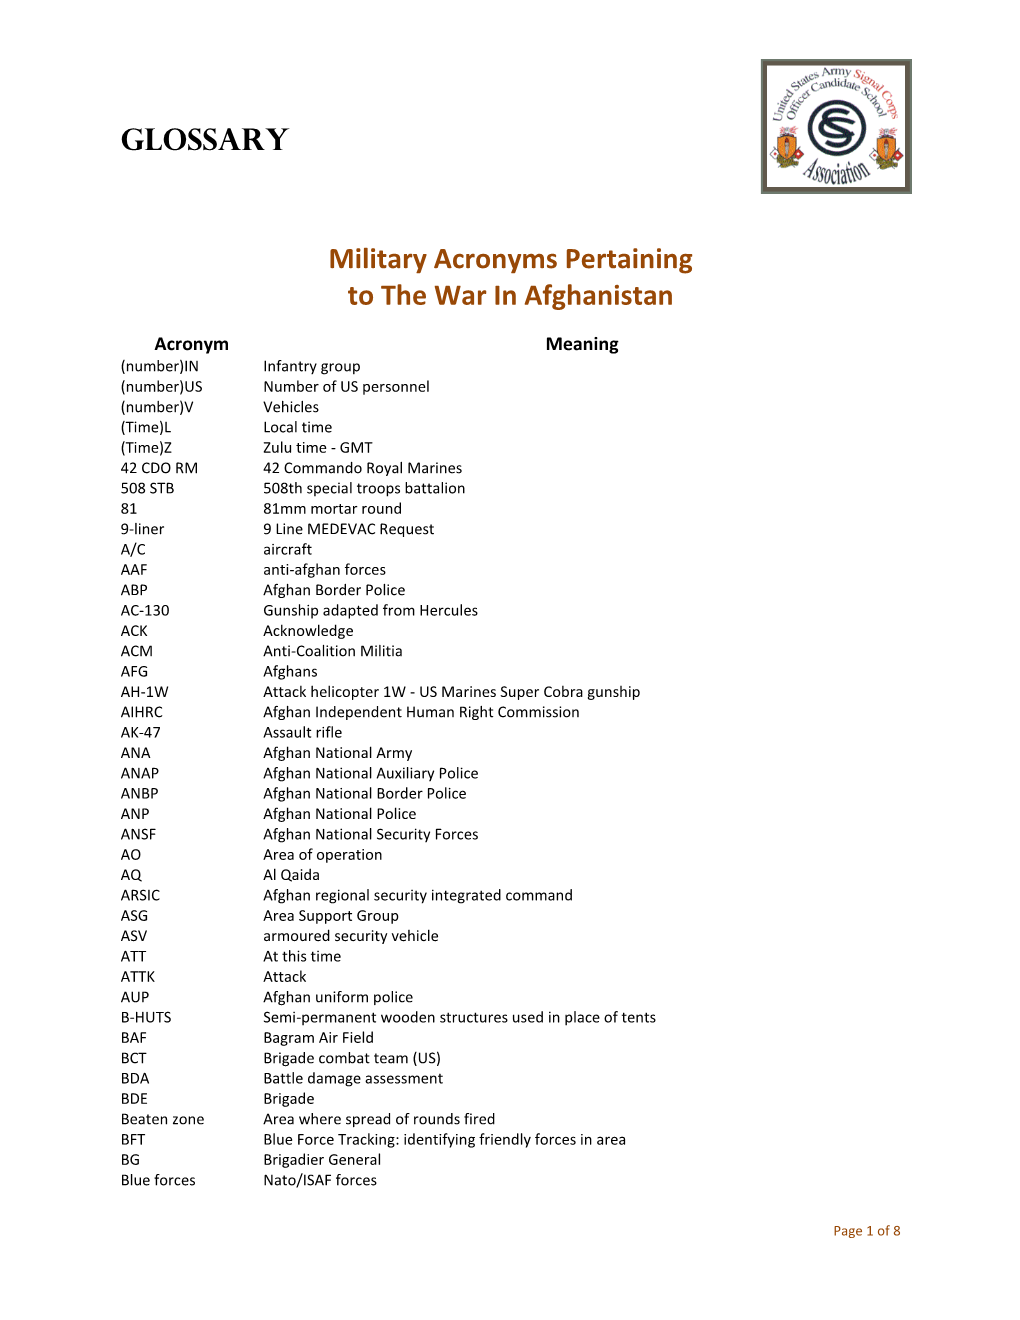 Glossary Military Acronyms Pertaining to the War in Afghanistan